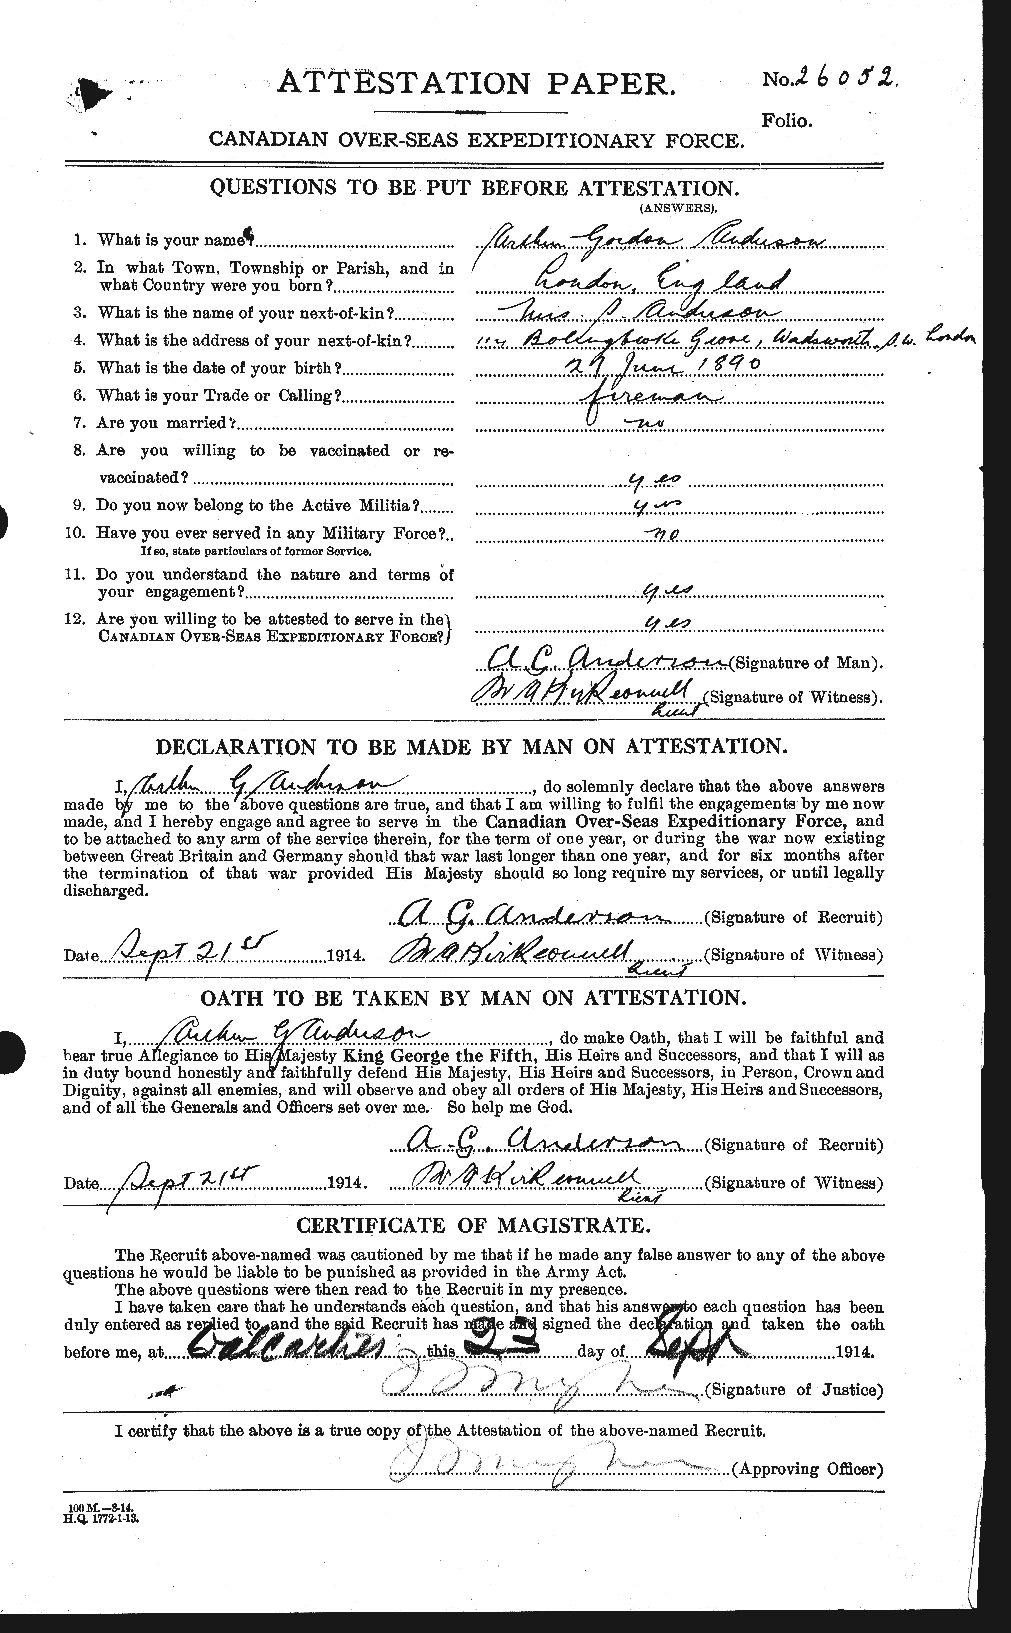 Personnel Records of the First World War - CEF 209355a